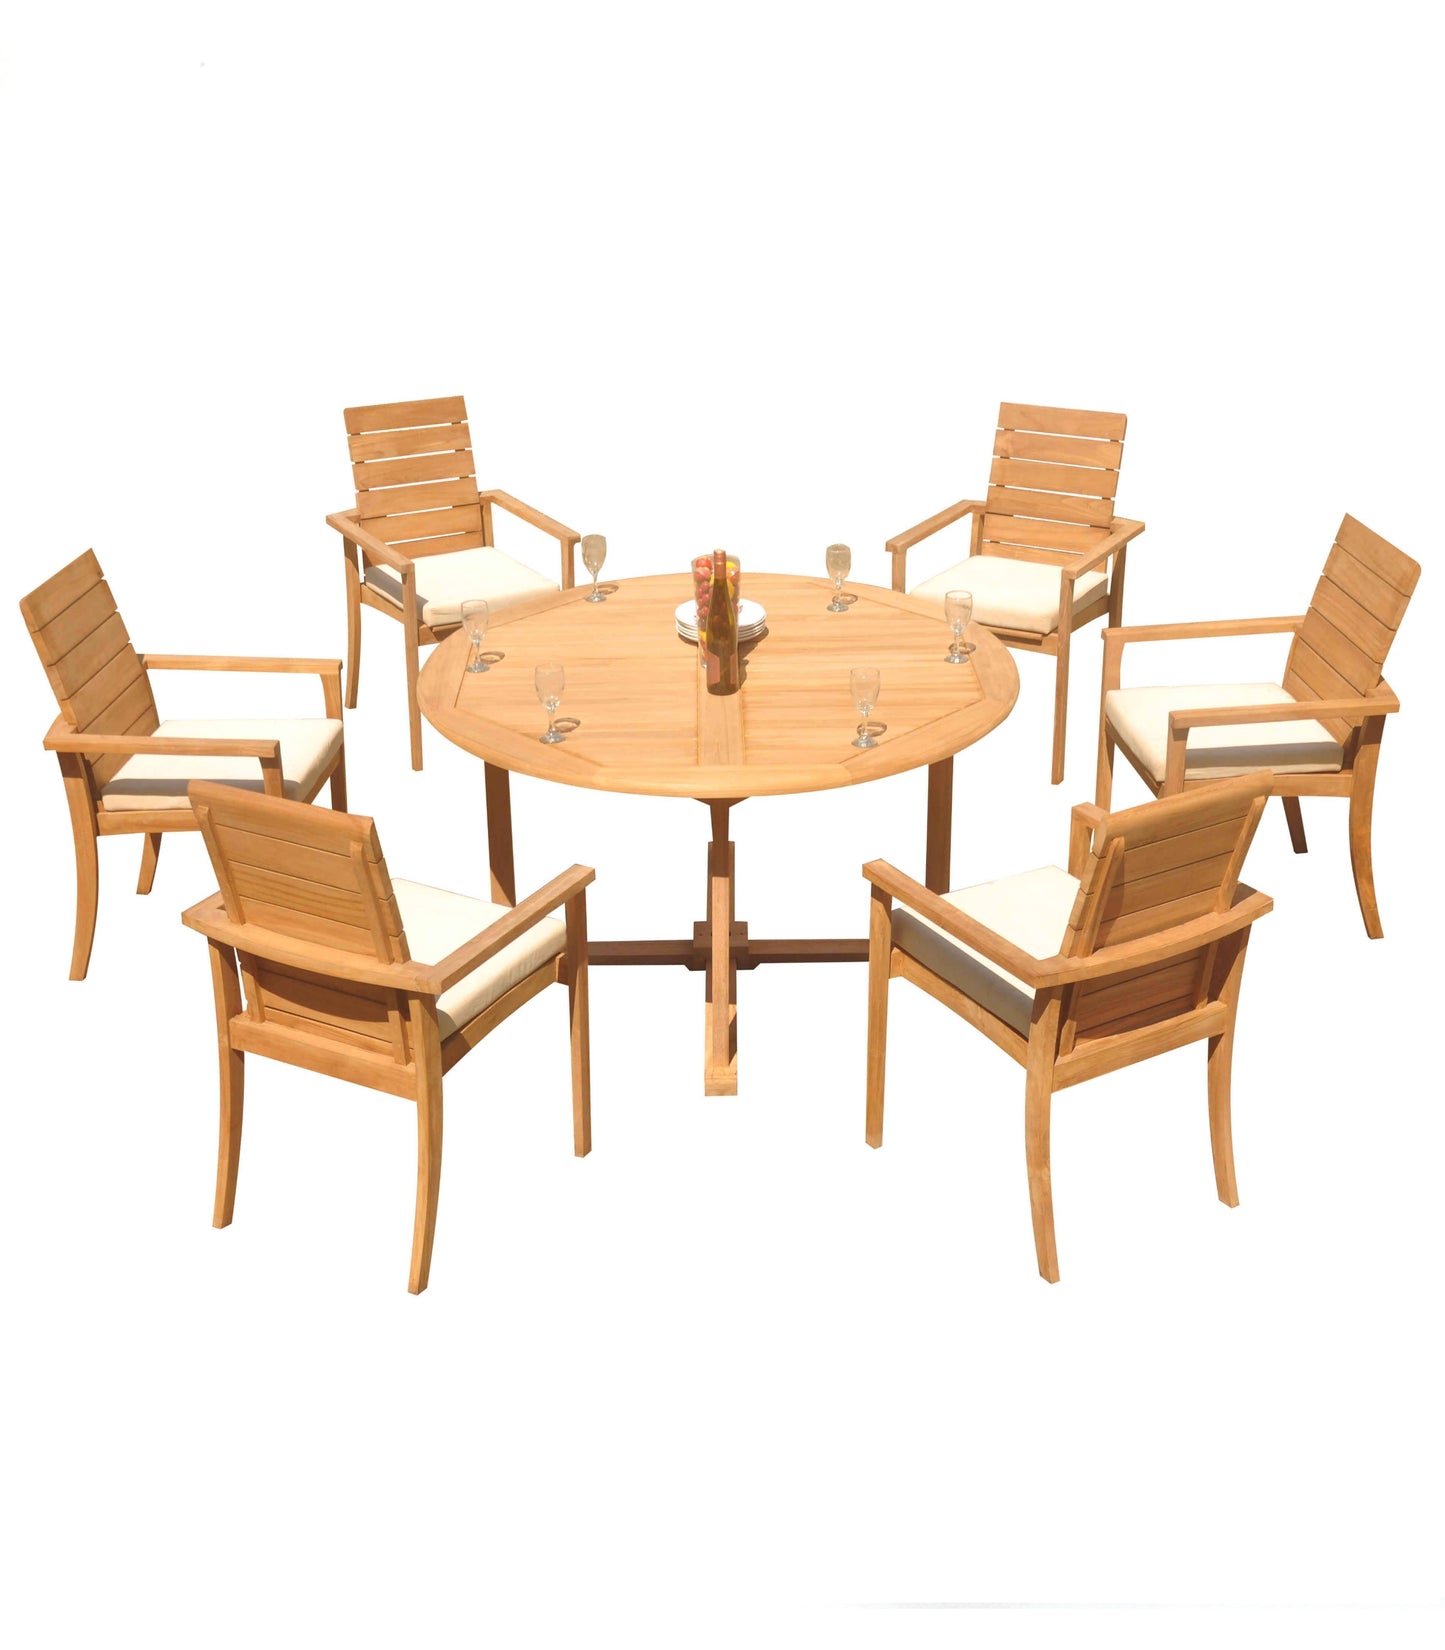 60" Round Table with 6 Algrave Stacking Chairs